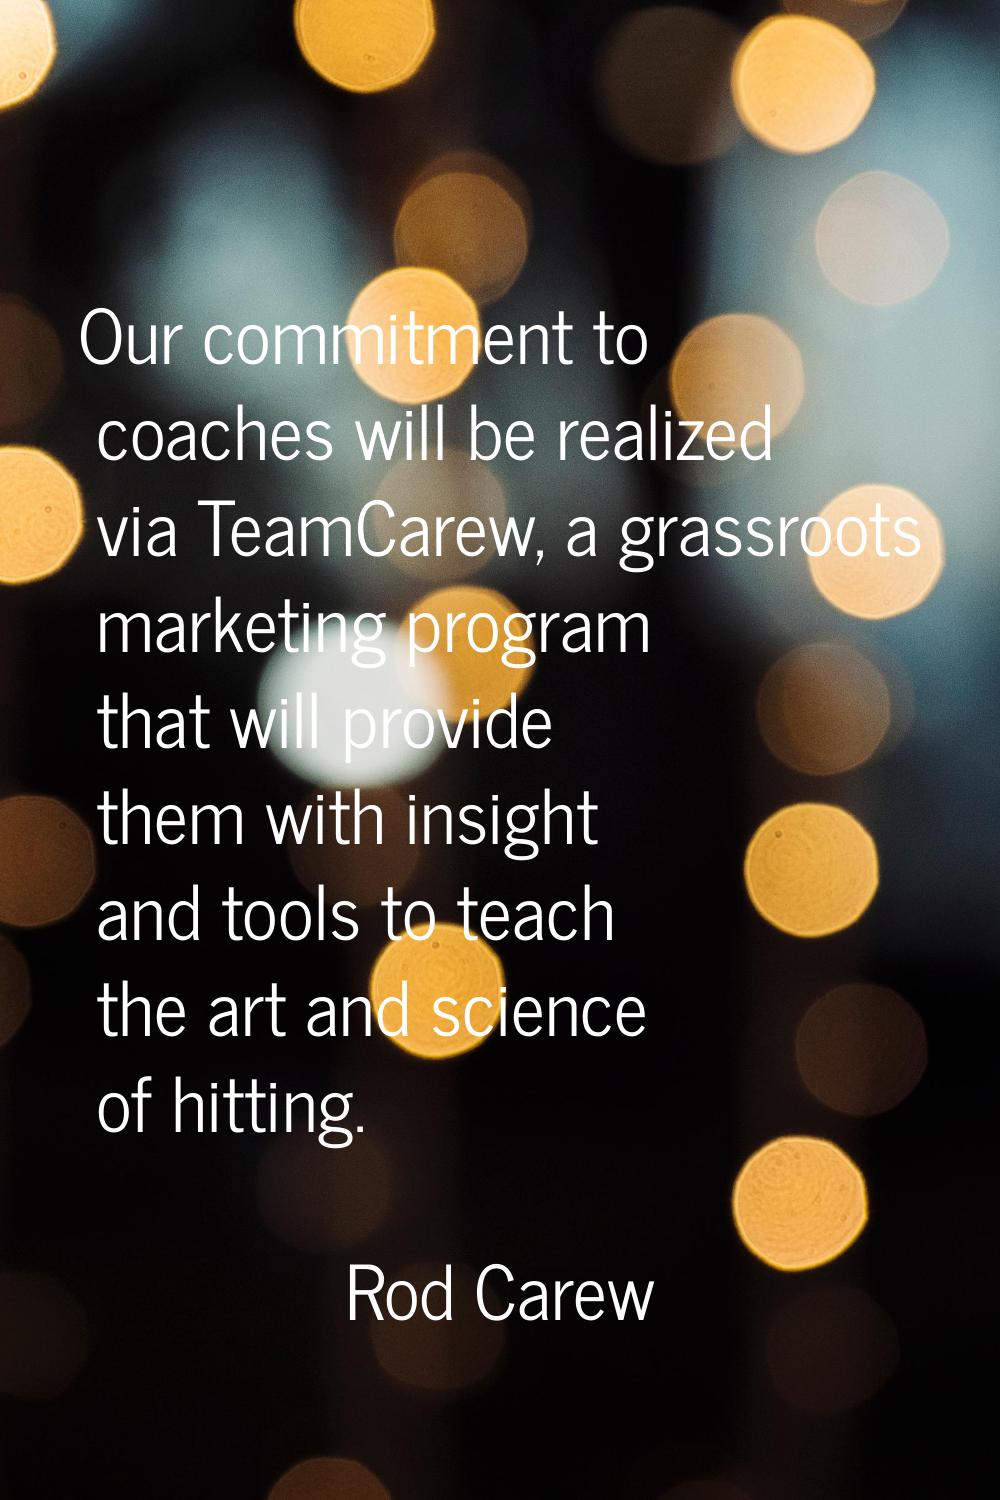 Our commitment to coaches will be realized via TeamCarew, a grassroots marketing program that will 